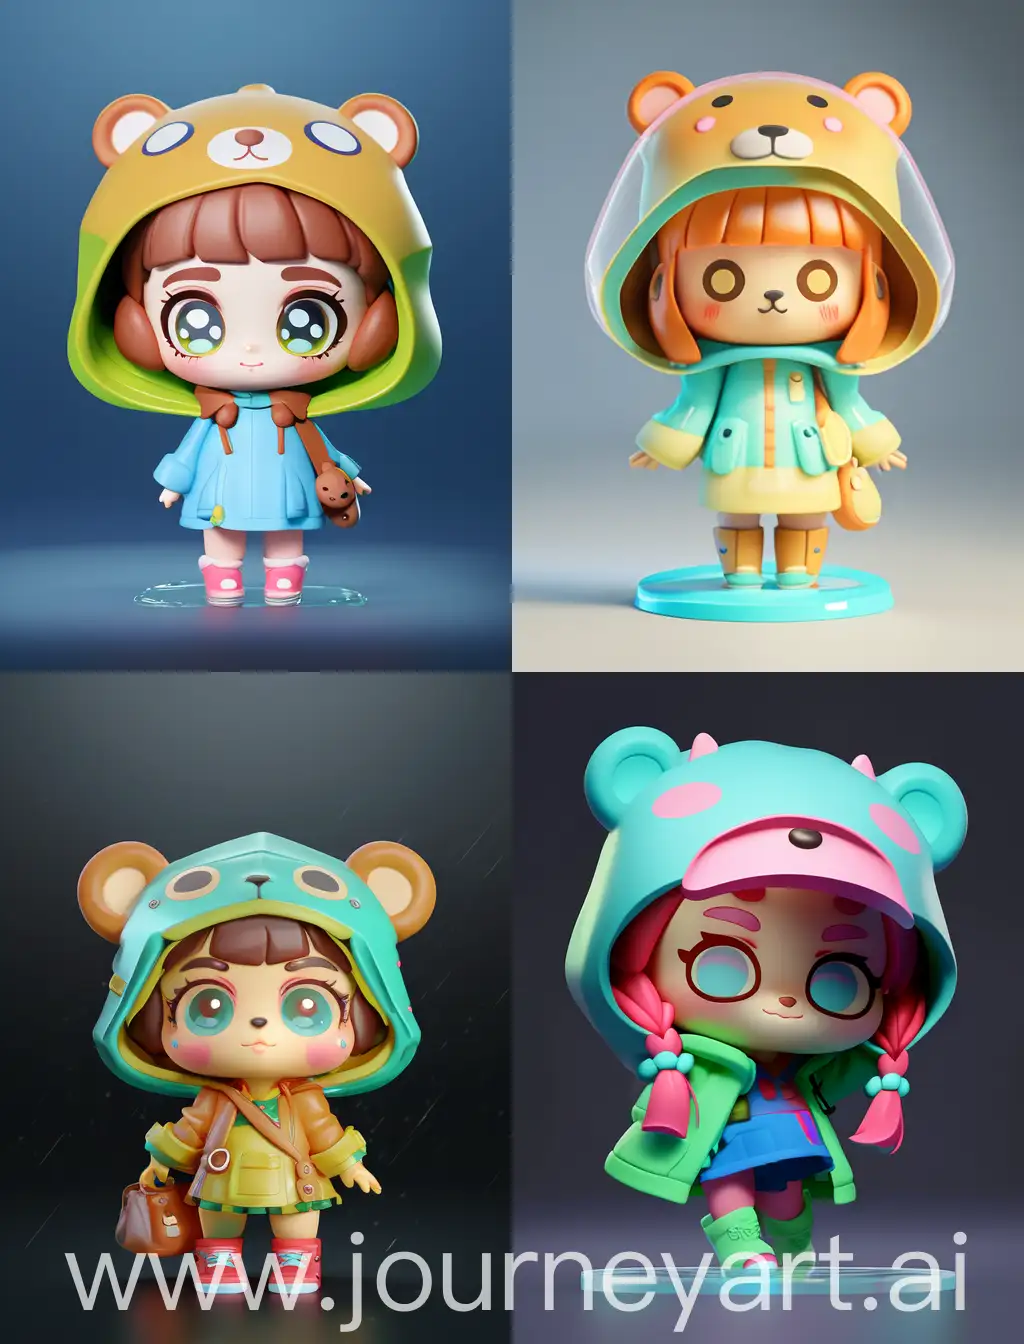 Adorable-Chibi-Girl-in-Translucent-Bear-Raincoat-Playful-and-Bright-Blind-Box-Style-Illustration